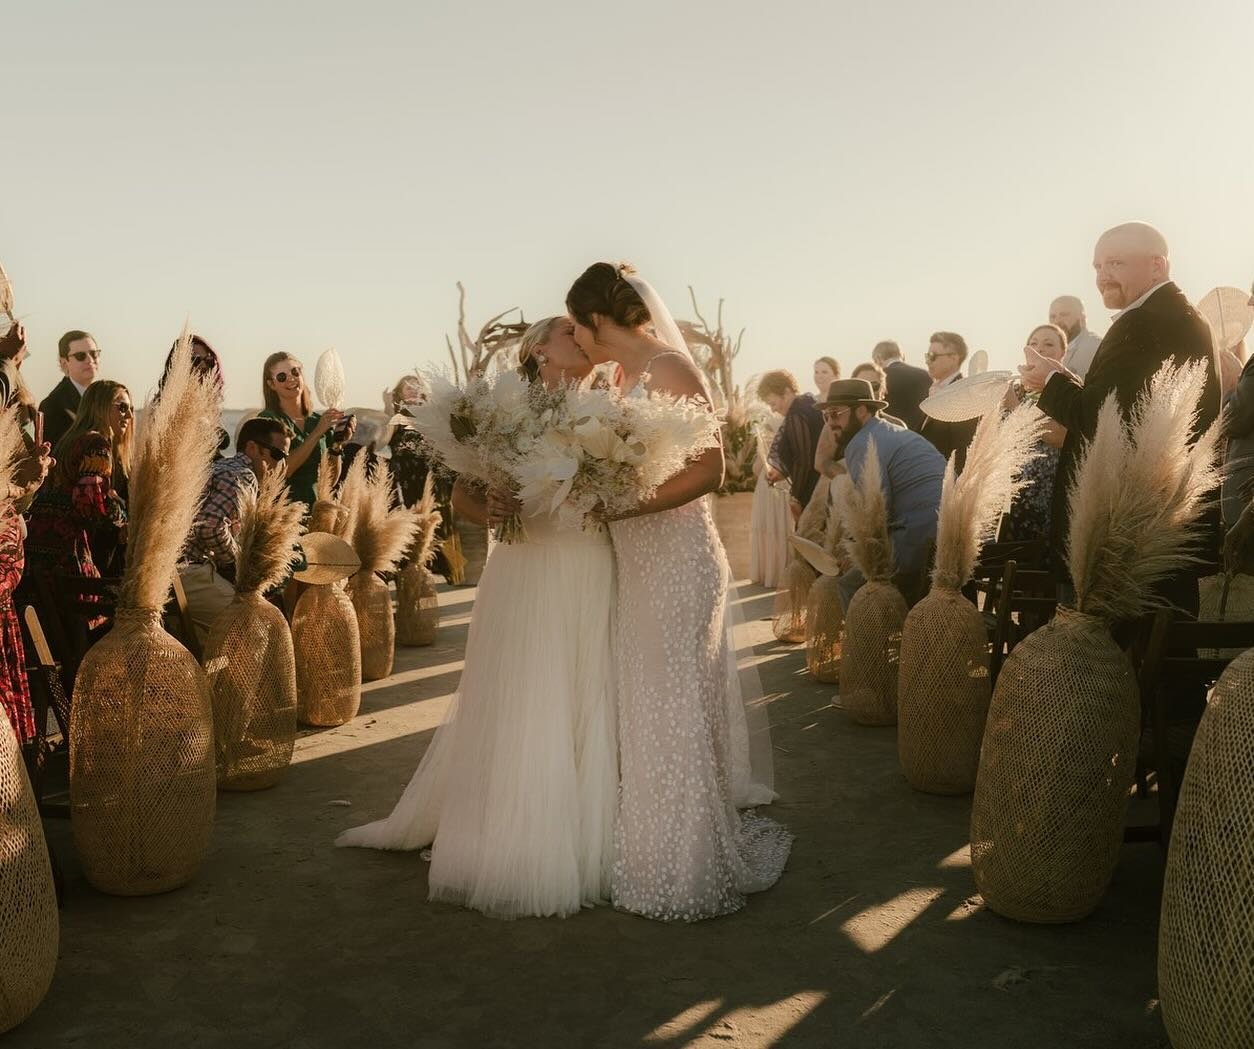 TORI + NIKKI 🫶 

These beachy dried florals make us wish it was fall already 😭

Looking for your wedding or event florals? Hit the link in our bio to get in touch!! 🔗✨

VENDORS⬇️
couple: @victoriabos @nikkibos17
photography: @frykmanphotography
fl